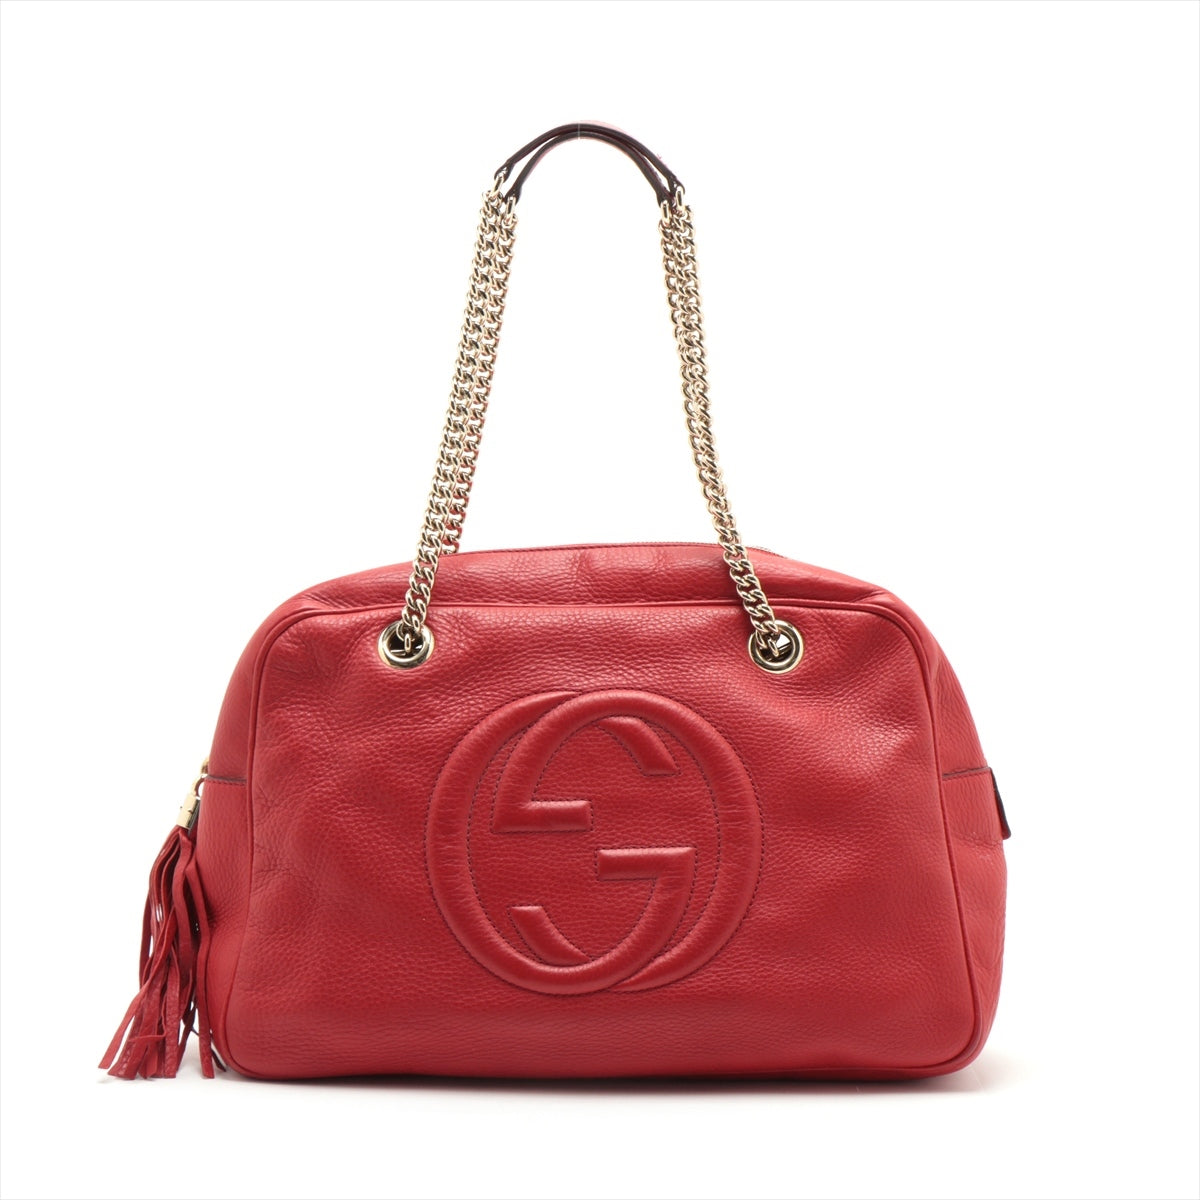 Gucci Soho Leather Chain shoulder bag Red 353126